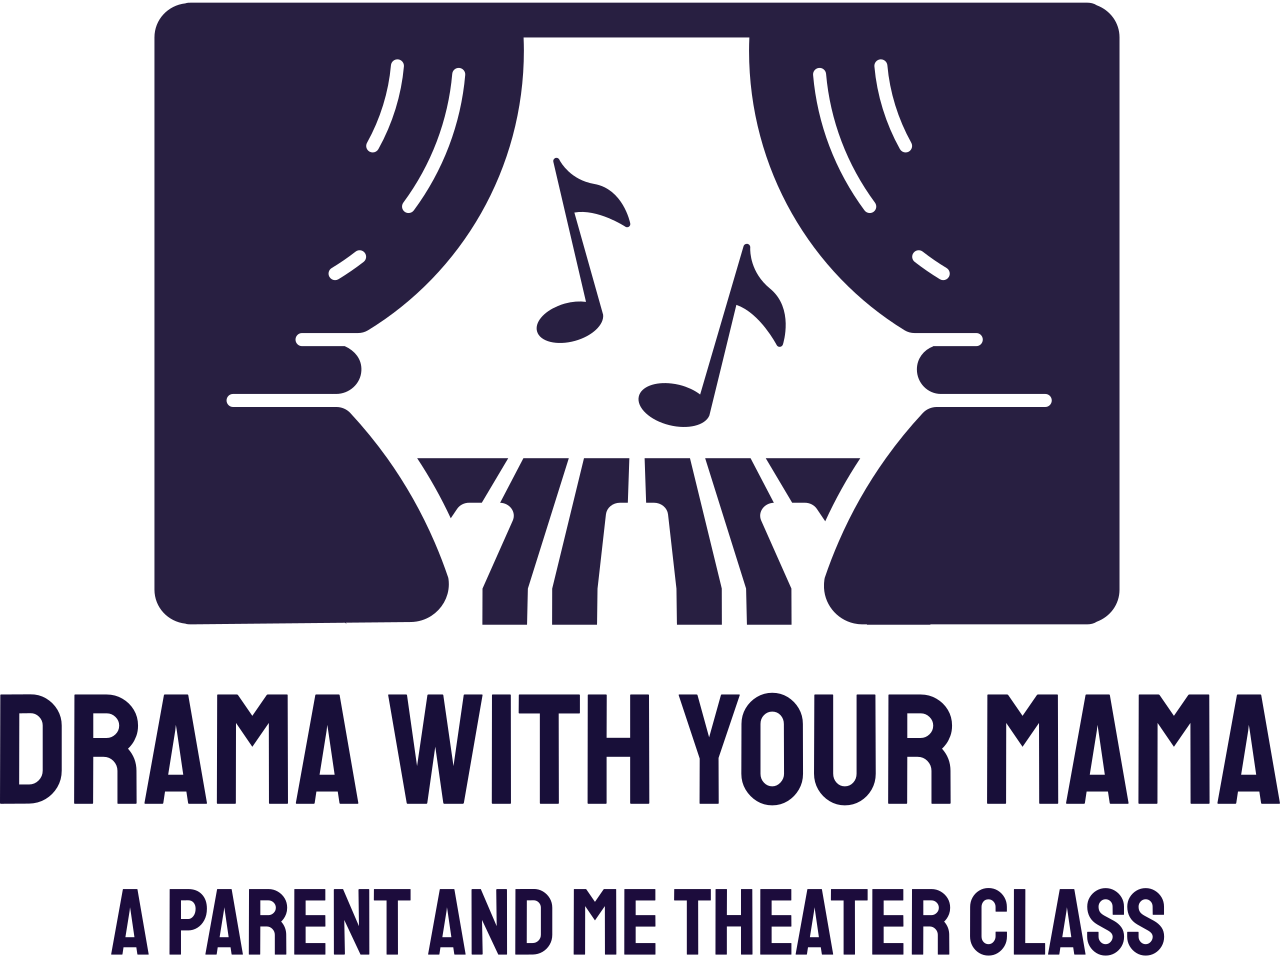 drama with your mama's logo